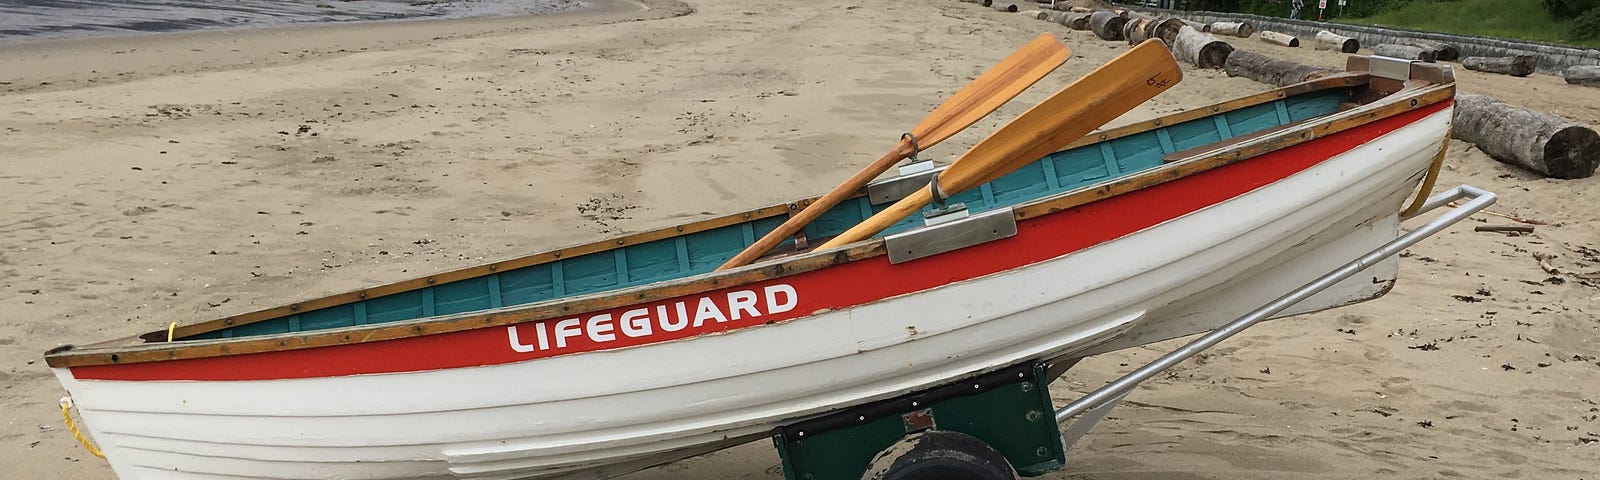 A photo of a small white dinghy with a red line painted on the top wooden panel and the word Lifeguard in white letters. There are two oars in the boat and it sits on a sandy beach.